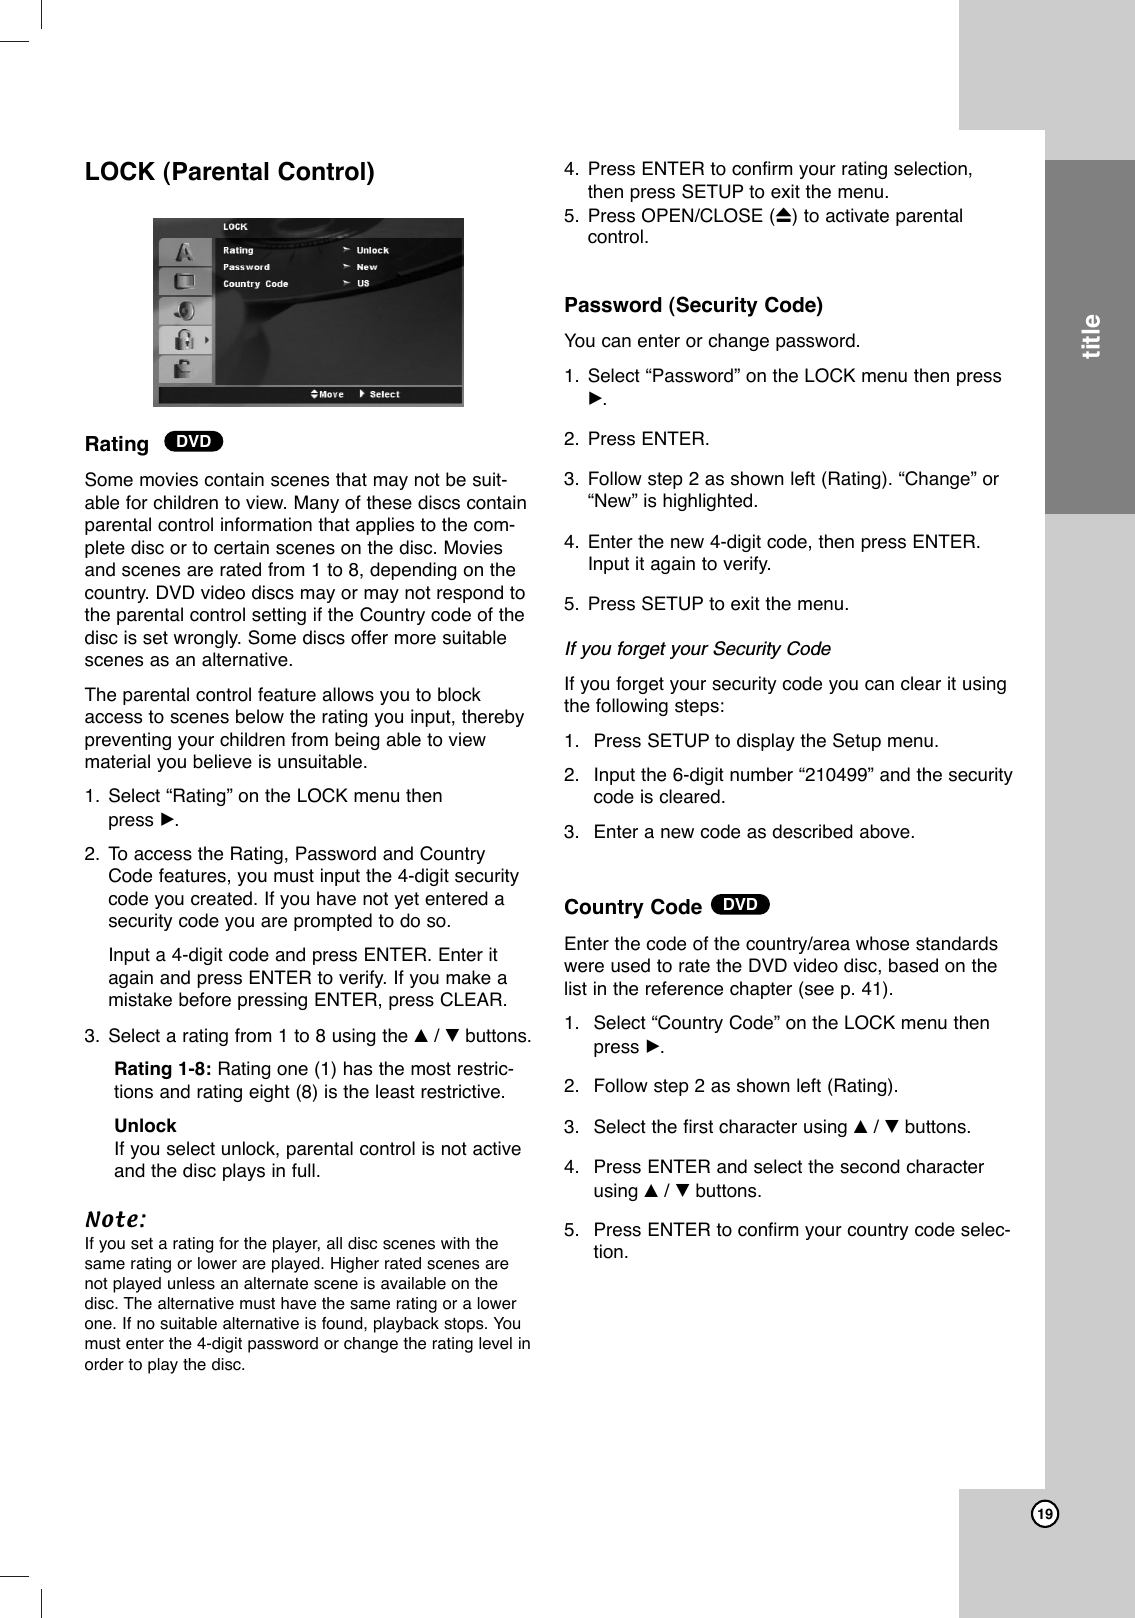 19LOCK (Parental Control)  Rating  Some movies contain scenes that may not be suit-able for children to view. Many of these discs containparental control information that applies to the com-plete disc or to certain scenes on the disc. Moviesand scenes are rated from 1 to 8, depending on thecountry. DVD video discs may or may not respond tothe parental control setting if the Country code of thedisc is set wrongly. Some discs offer more suitablescenes as an alternative. The parental control feature allows you to blockaccess to scenes below the rating you input, therebypreventing your children from being able to viewmaterial you believe is unsuitable. 1. Select “Rating” on the LOCK menu then press B.2. To access the Rating, Password and CountryCode features, you must input the 4-digit securitycode you created. If you have not yet entered asecurity code you are prompted to do so. Input a 4-digit code and press ENTER. Enter itagain and press ENTER to verify. If you make amistake before pressing ENTER, press CLEAR.3. Select a rating from 1 to 8 using the v/Vbuttons. Rating 1-8: Rating one (1) has the most restric-tions and rating eight (8) is the least restrictive.UnlockIf you select unlock, parental control is not activeand the disc plays in full.Note:If you set a rating for the player, all disc scenes with thesame rating or lower are played. Higher rated scenes arenot played unless an alternate scene is available on thedisc. The alternative must have the same rating or a lowerone. If no suitable alternative is found, playback stops. Youmust enter the 4-digit password or change the rating level inorder to play the disc.4. Press ENTER to confirm your rating selection,then press SETUP to exit the menu.5. Press OPEN/CLOSE (Z)to activate parental control.Password (Security Code)You can enter or change password.1. Select “Password” on the LOCK menu then pressB. 2. Press ENTER.3. Follow step 2 as shown left (Rating). “Change” or“New” is highlighted.4. Enter the new 4-digit code, then press ENTER.Input it again to verify.5. Press SETUP to exit the menu.If you forget your Security CodeIf you forget your security code you can clear it usingthe following steps:1. Press SETUP to display the Setup menu.2. Input the 6-digit number “210499” and the securitycode is cleared. 3. Enter a new code as described above.Country Code Enter the code of the country/area whose standardswere used to rate the DVD video disc, based on thelist in the reference chapter (see p. 41).1. Select “Country Code” on the LOCK menu thenpress B.2. Follow step 2 as shown left (Rating).3. Select the first character using v/Vbuttons.4. Press ENTER and select the second characterusing v/Vbuttons.5. Press ENTER to confirm your country code selec-tion.DVDDVDtitle